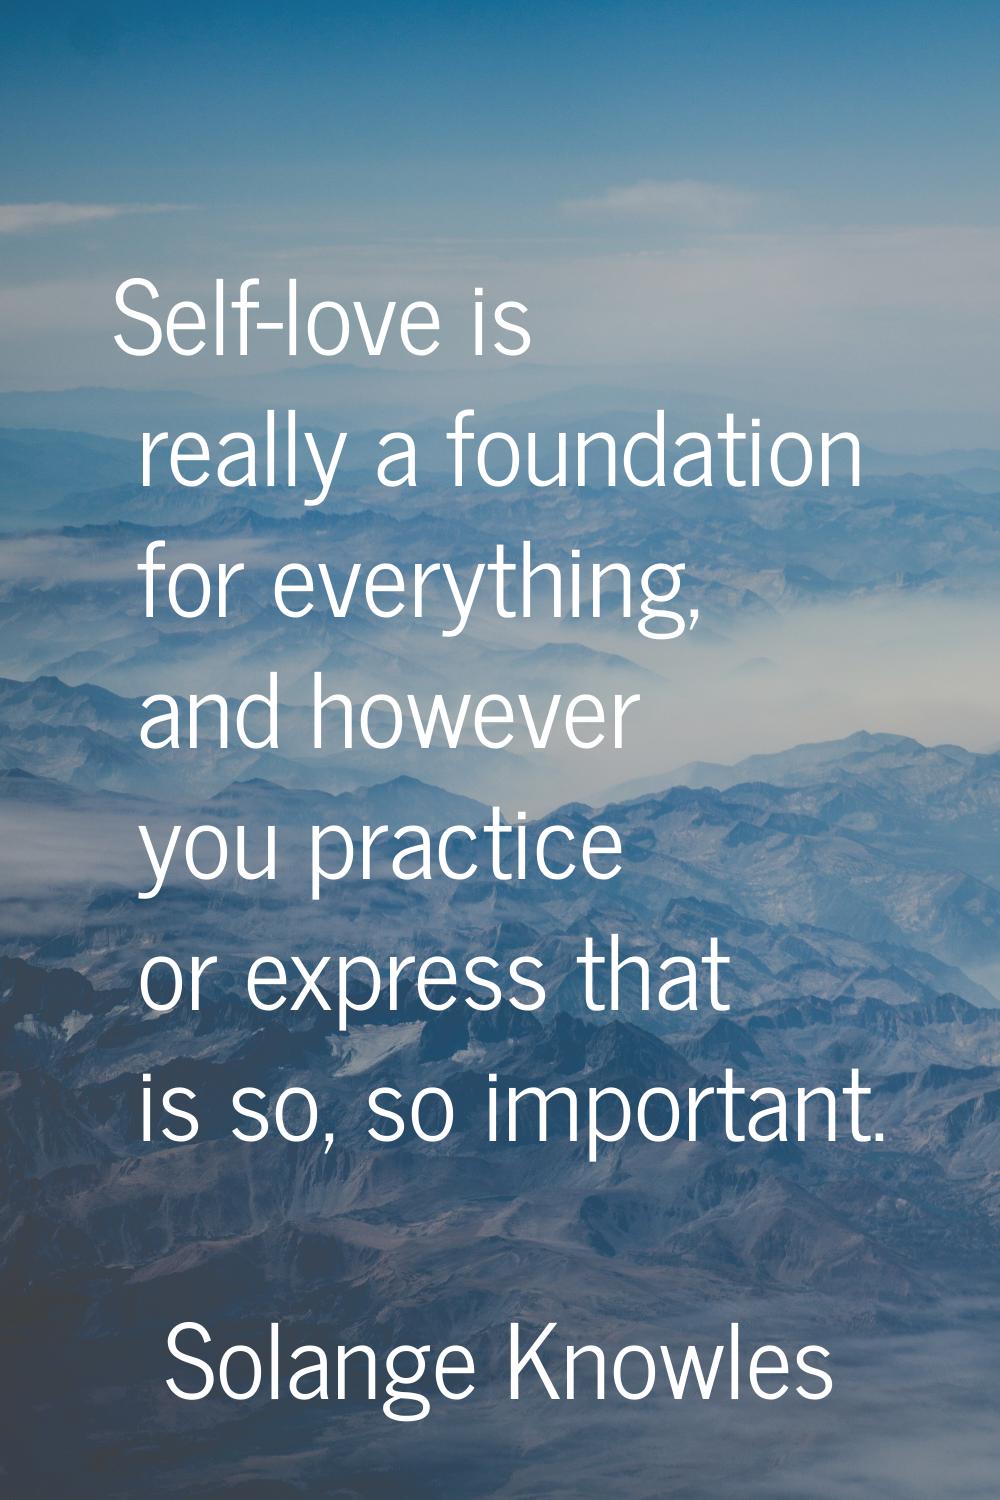 Self-love is really a foundation for everything, and however you practice or express that is so, so